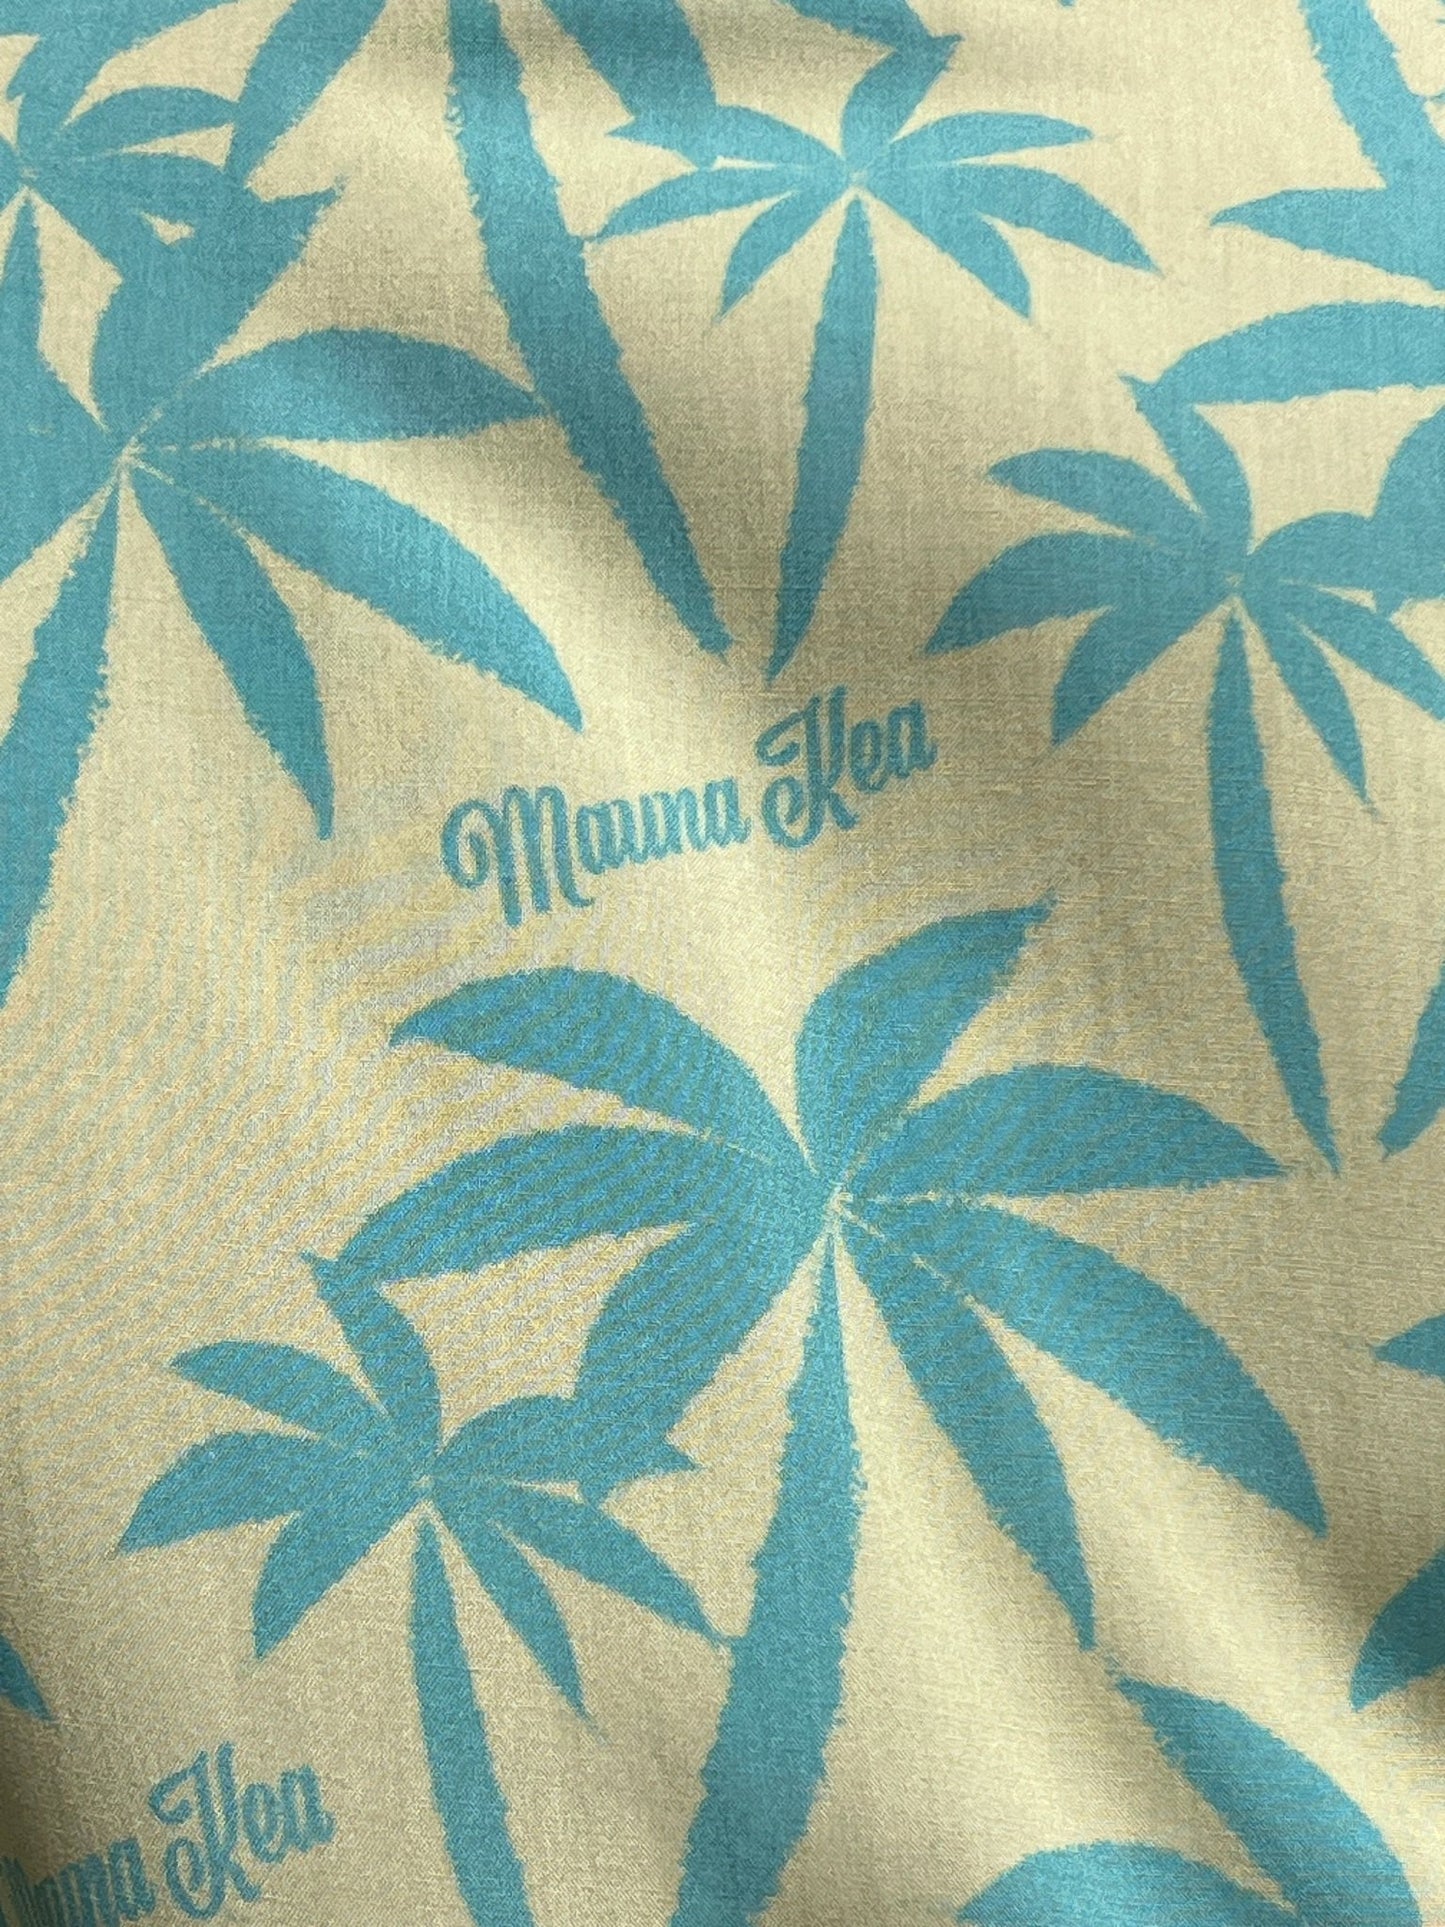 A short sleeve MAUNA-KEA MKU142-PM2 ALLOVER PRINT SHIRT GRN featuring a Mauna-Kea graphic with blue palm tree prints and the text "Mauna Kea" on a light beige background, proudly Made in Italy by MAUNA-KEA.